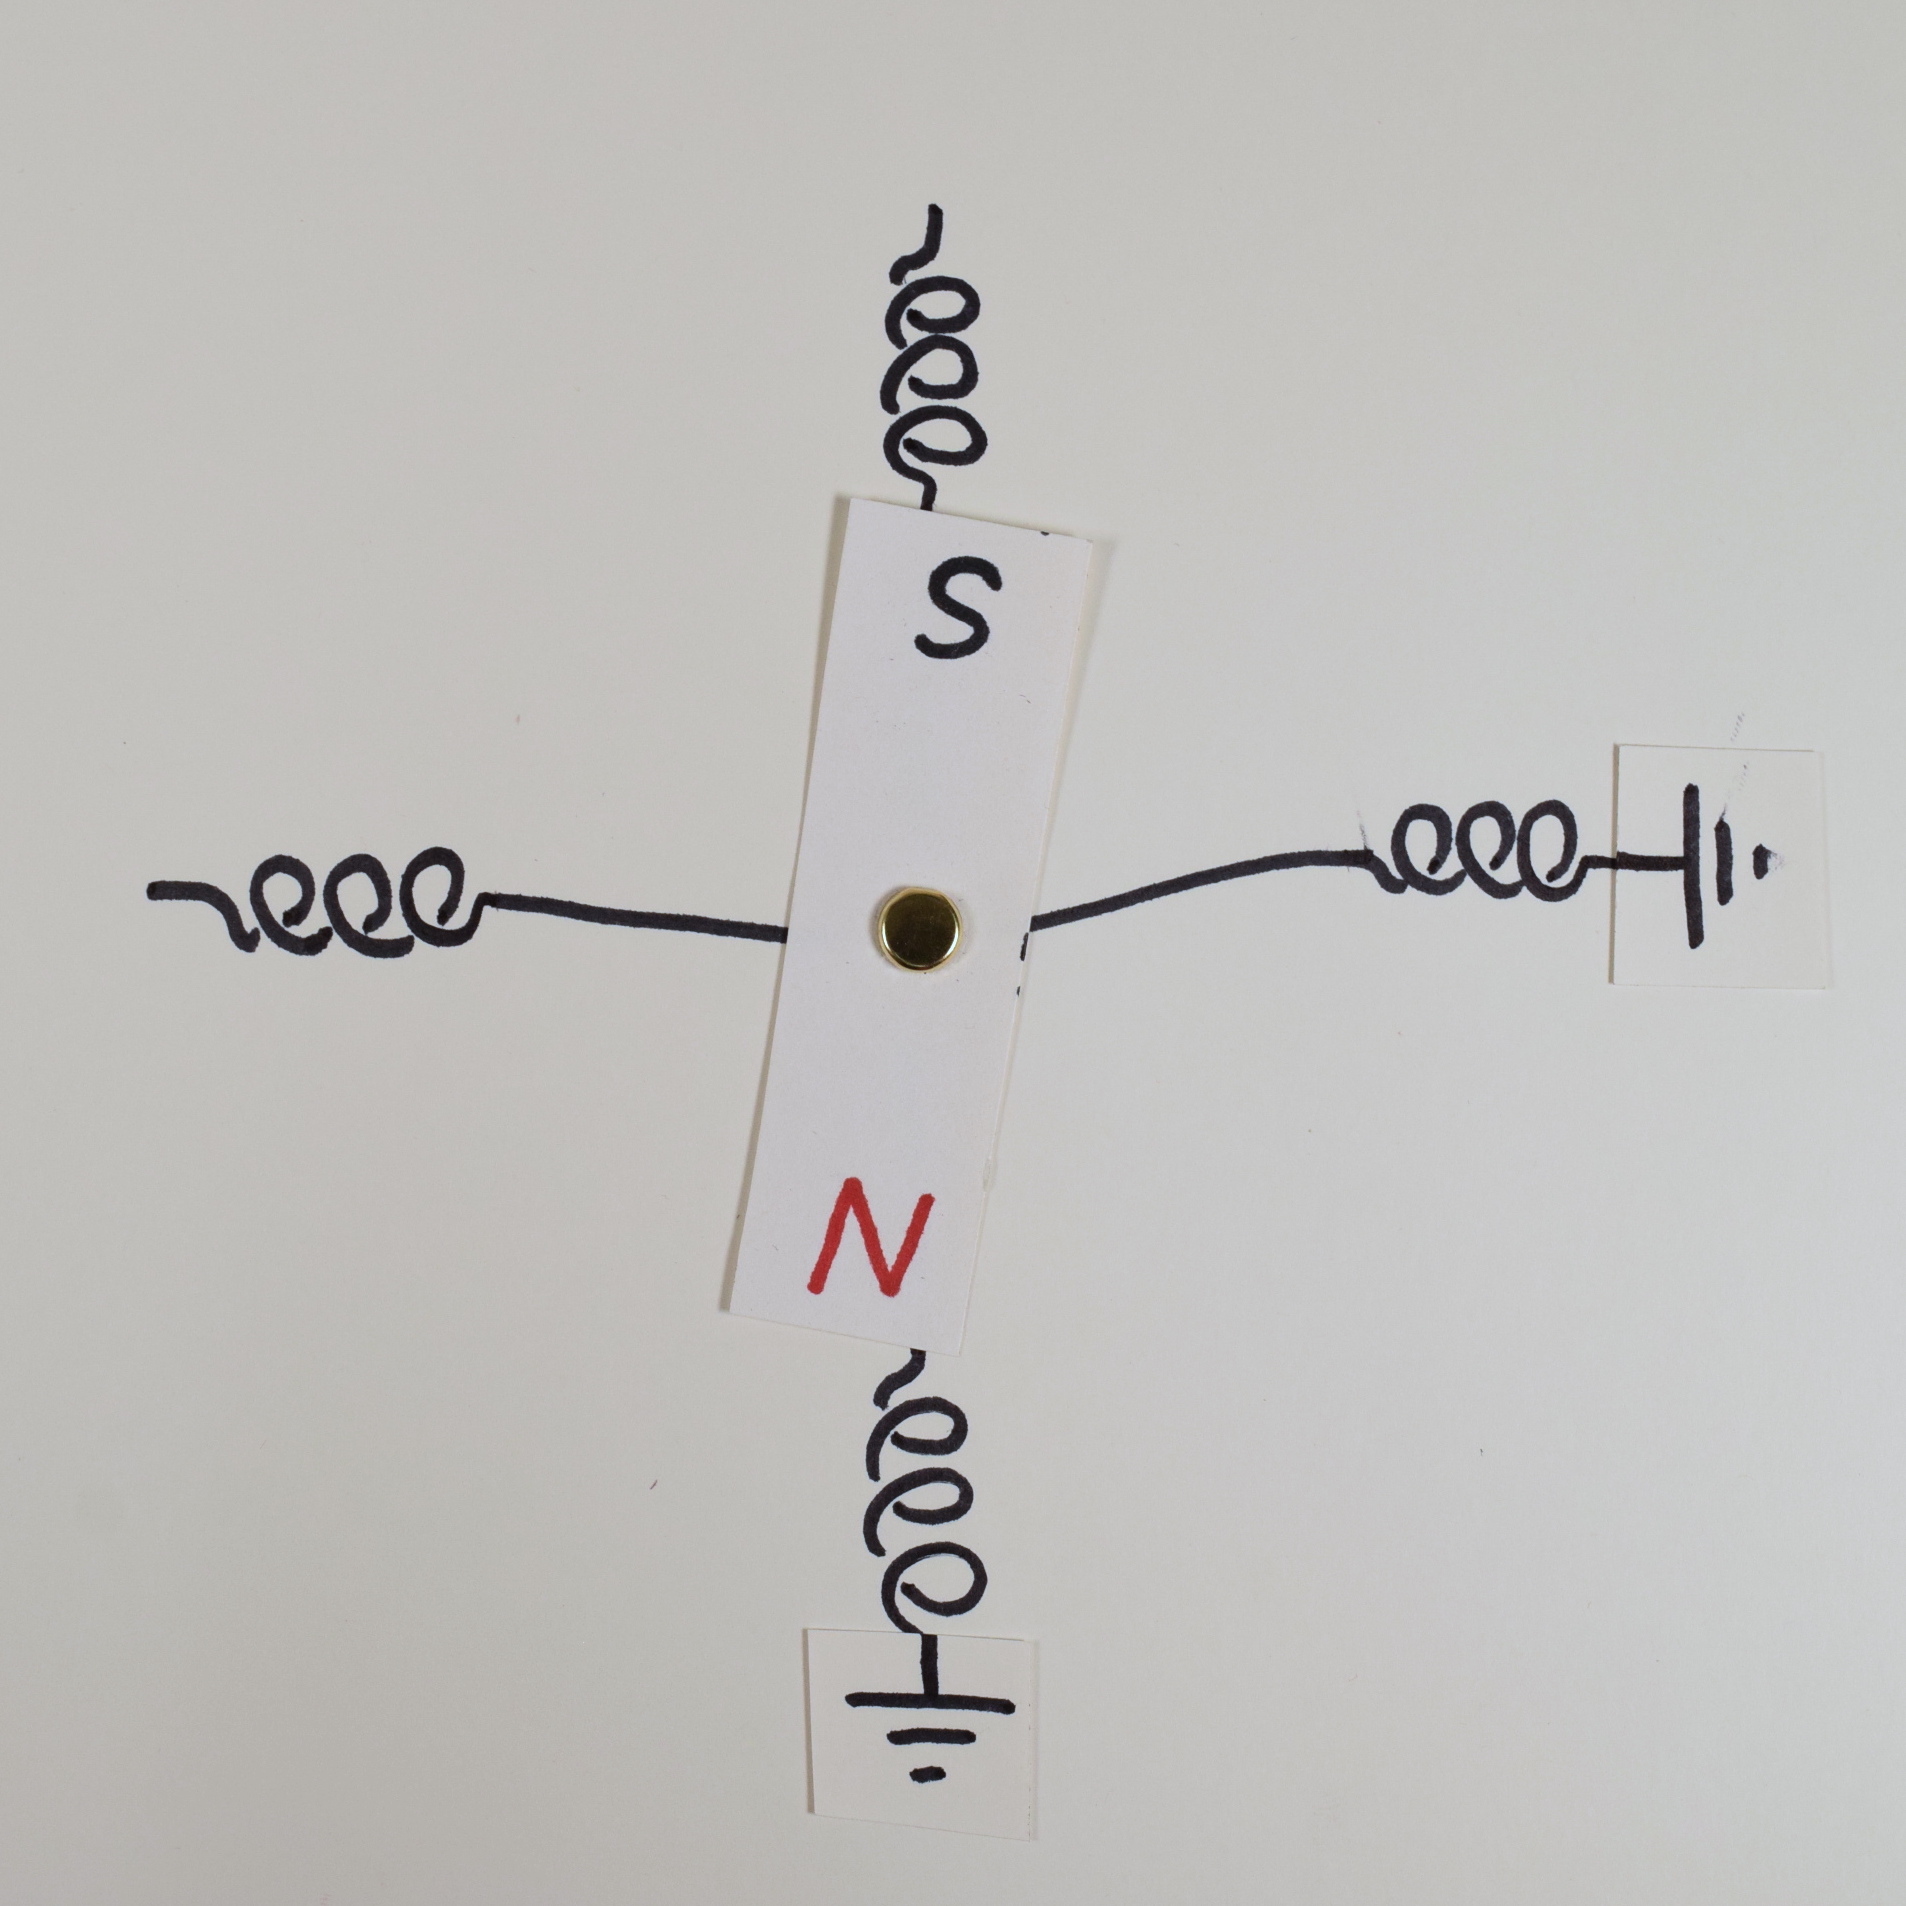 Diagrammatic drawing: in addition to the prior drawing, there is a coil oriented so that one of its halves is at 3 o'clock and the other half is at 9 o'clock.